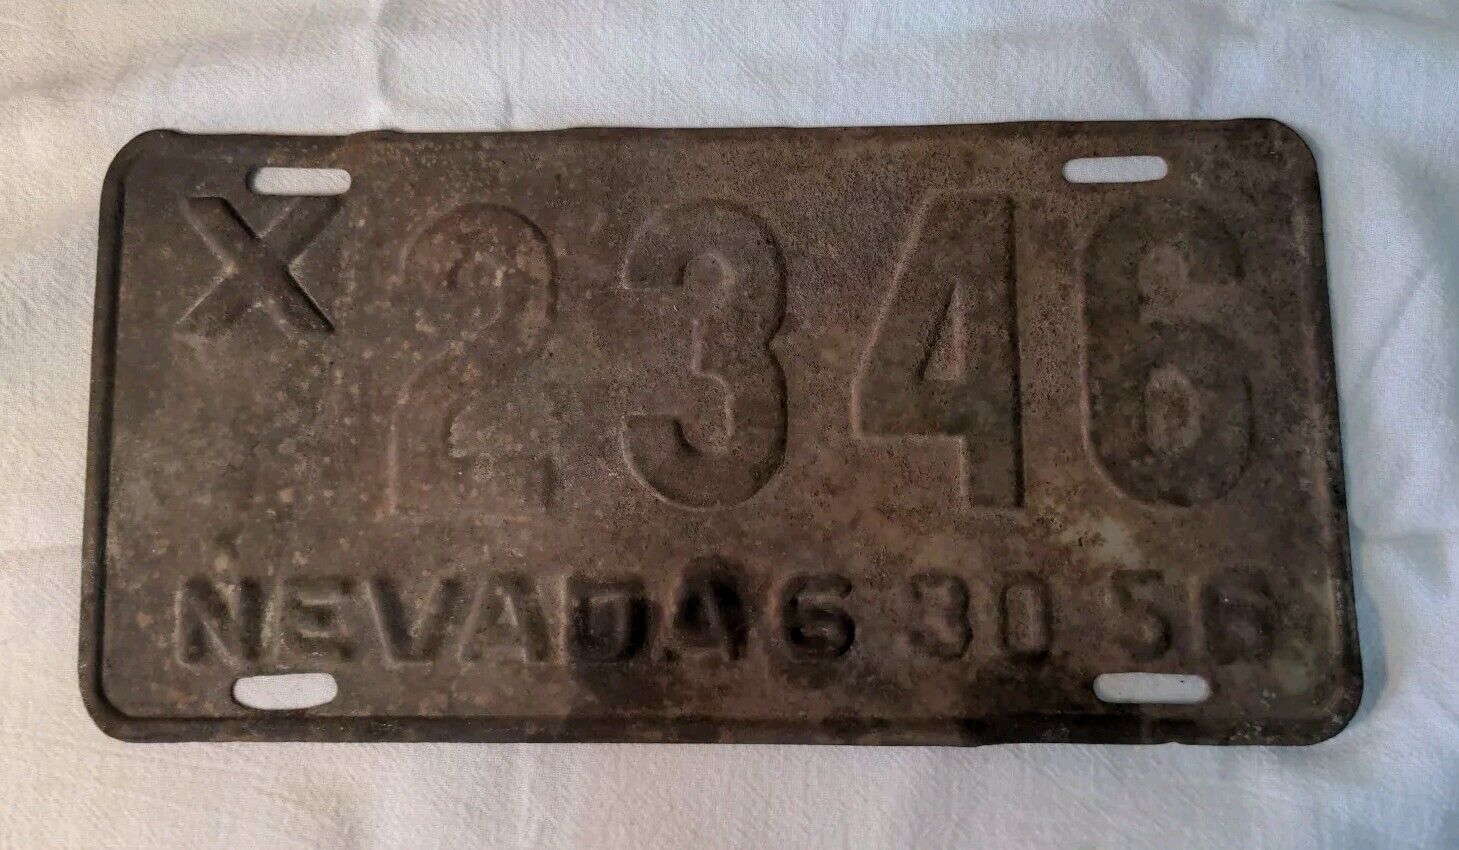 Vintage 1956 Nevada Single License Plate X 2346 6 30 56 Rust Weathered but Solid